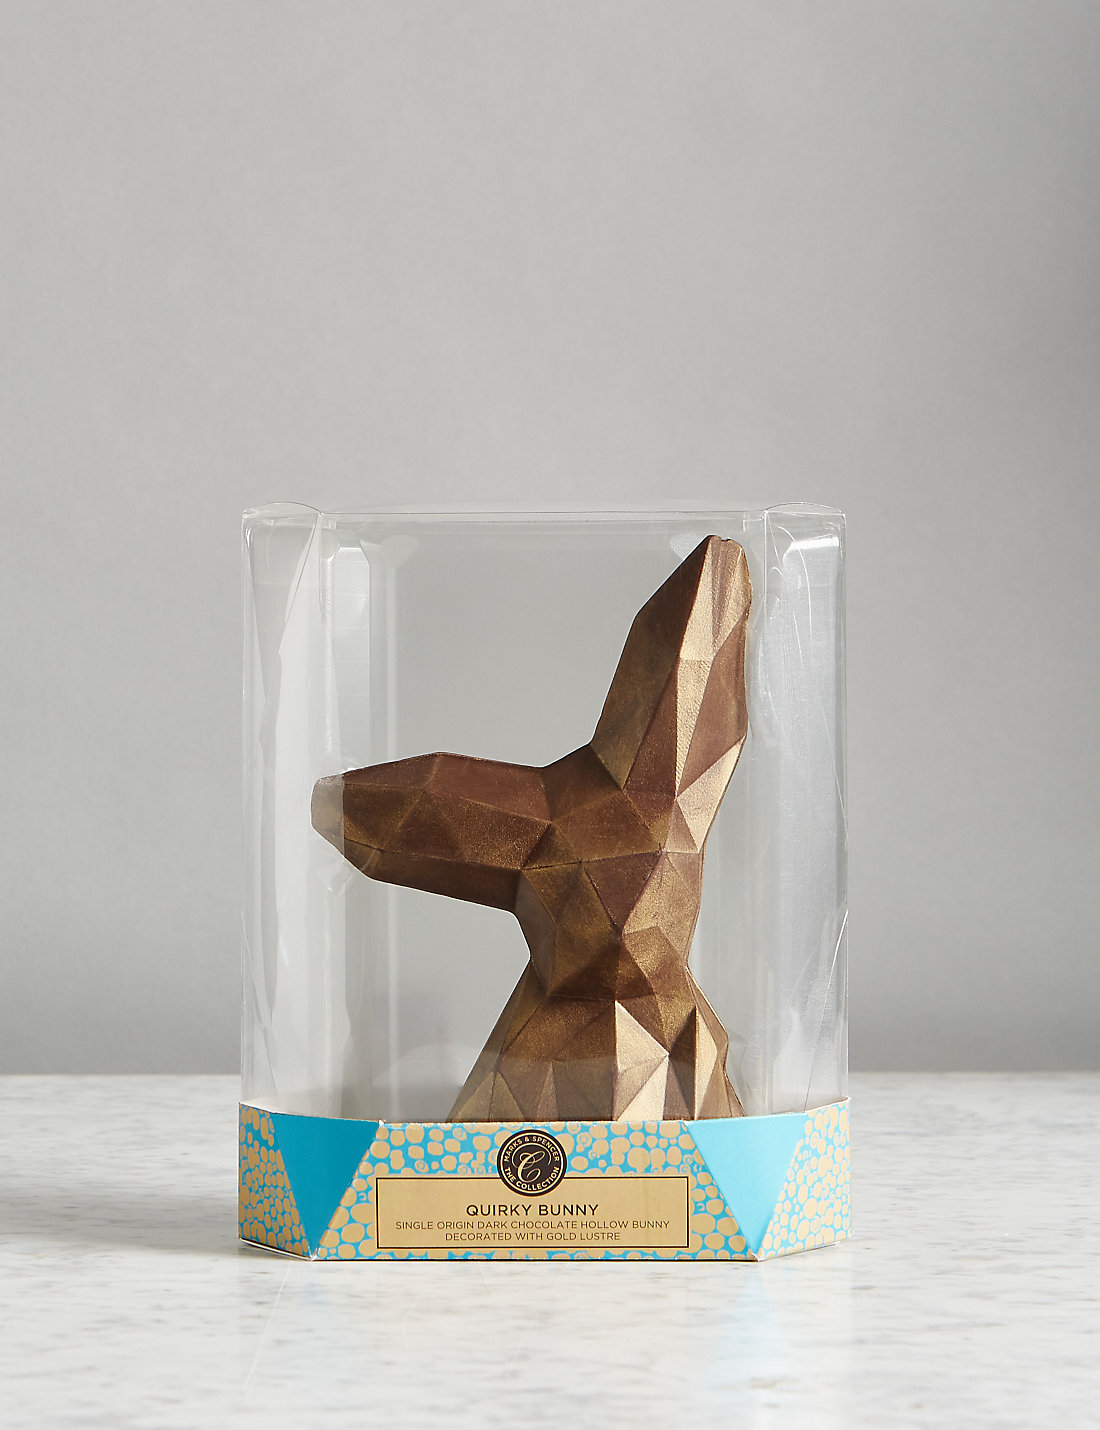 M&S Quirky Bunny